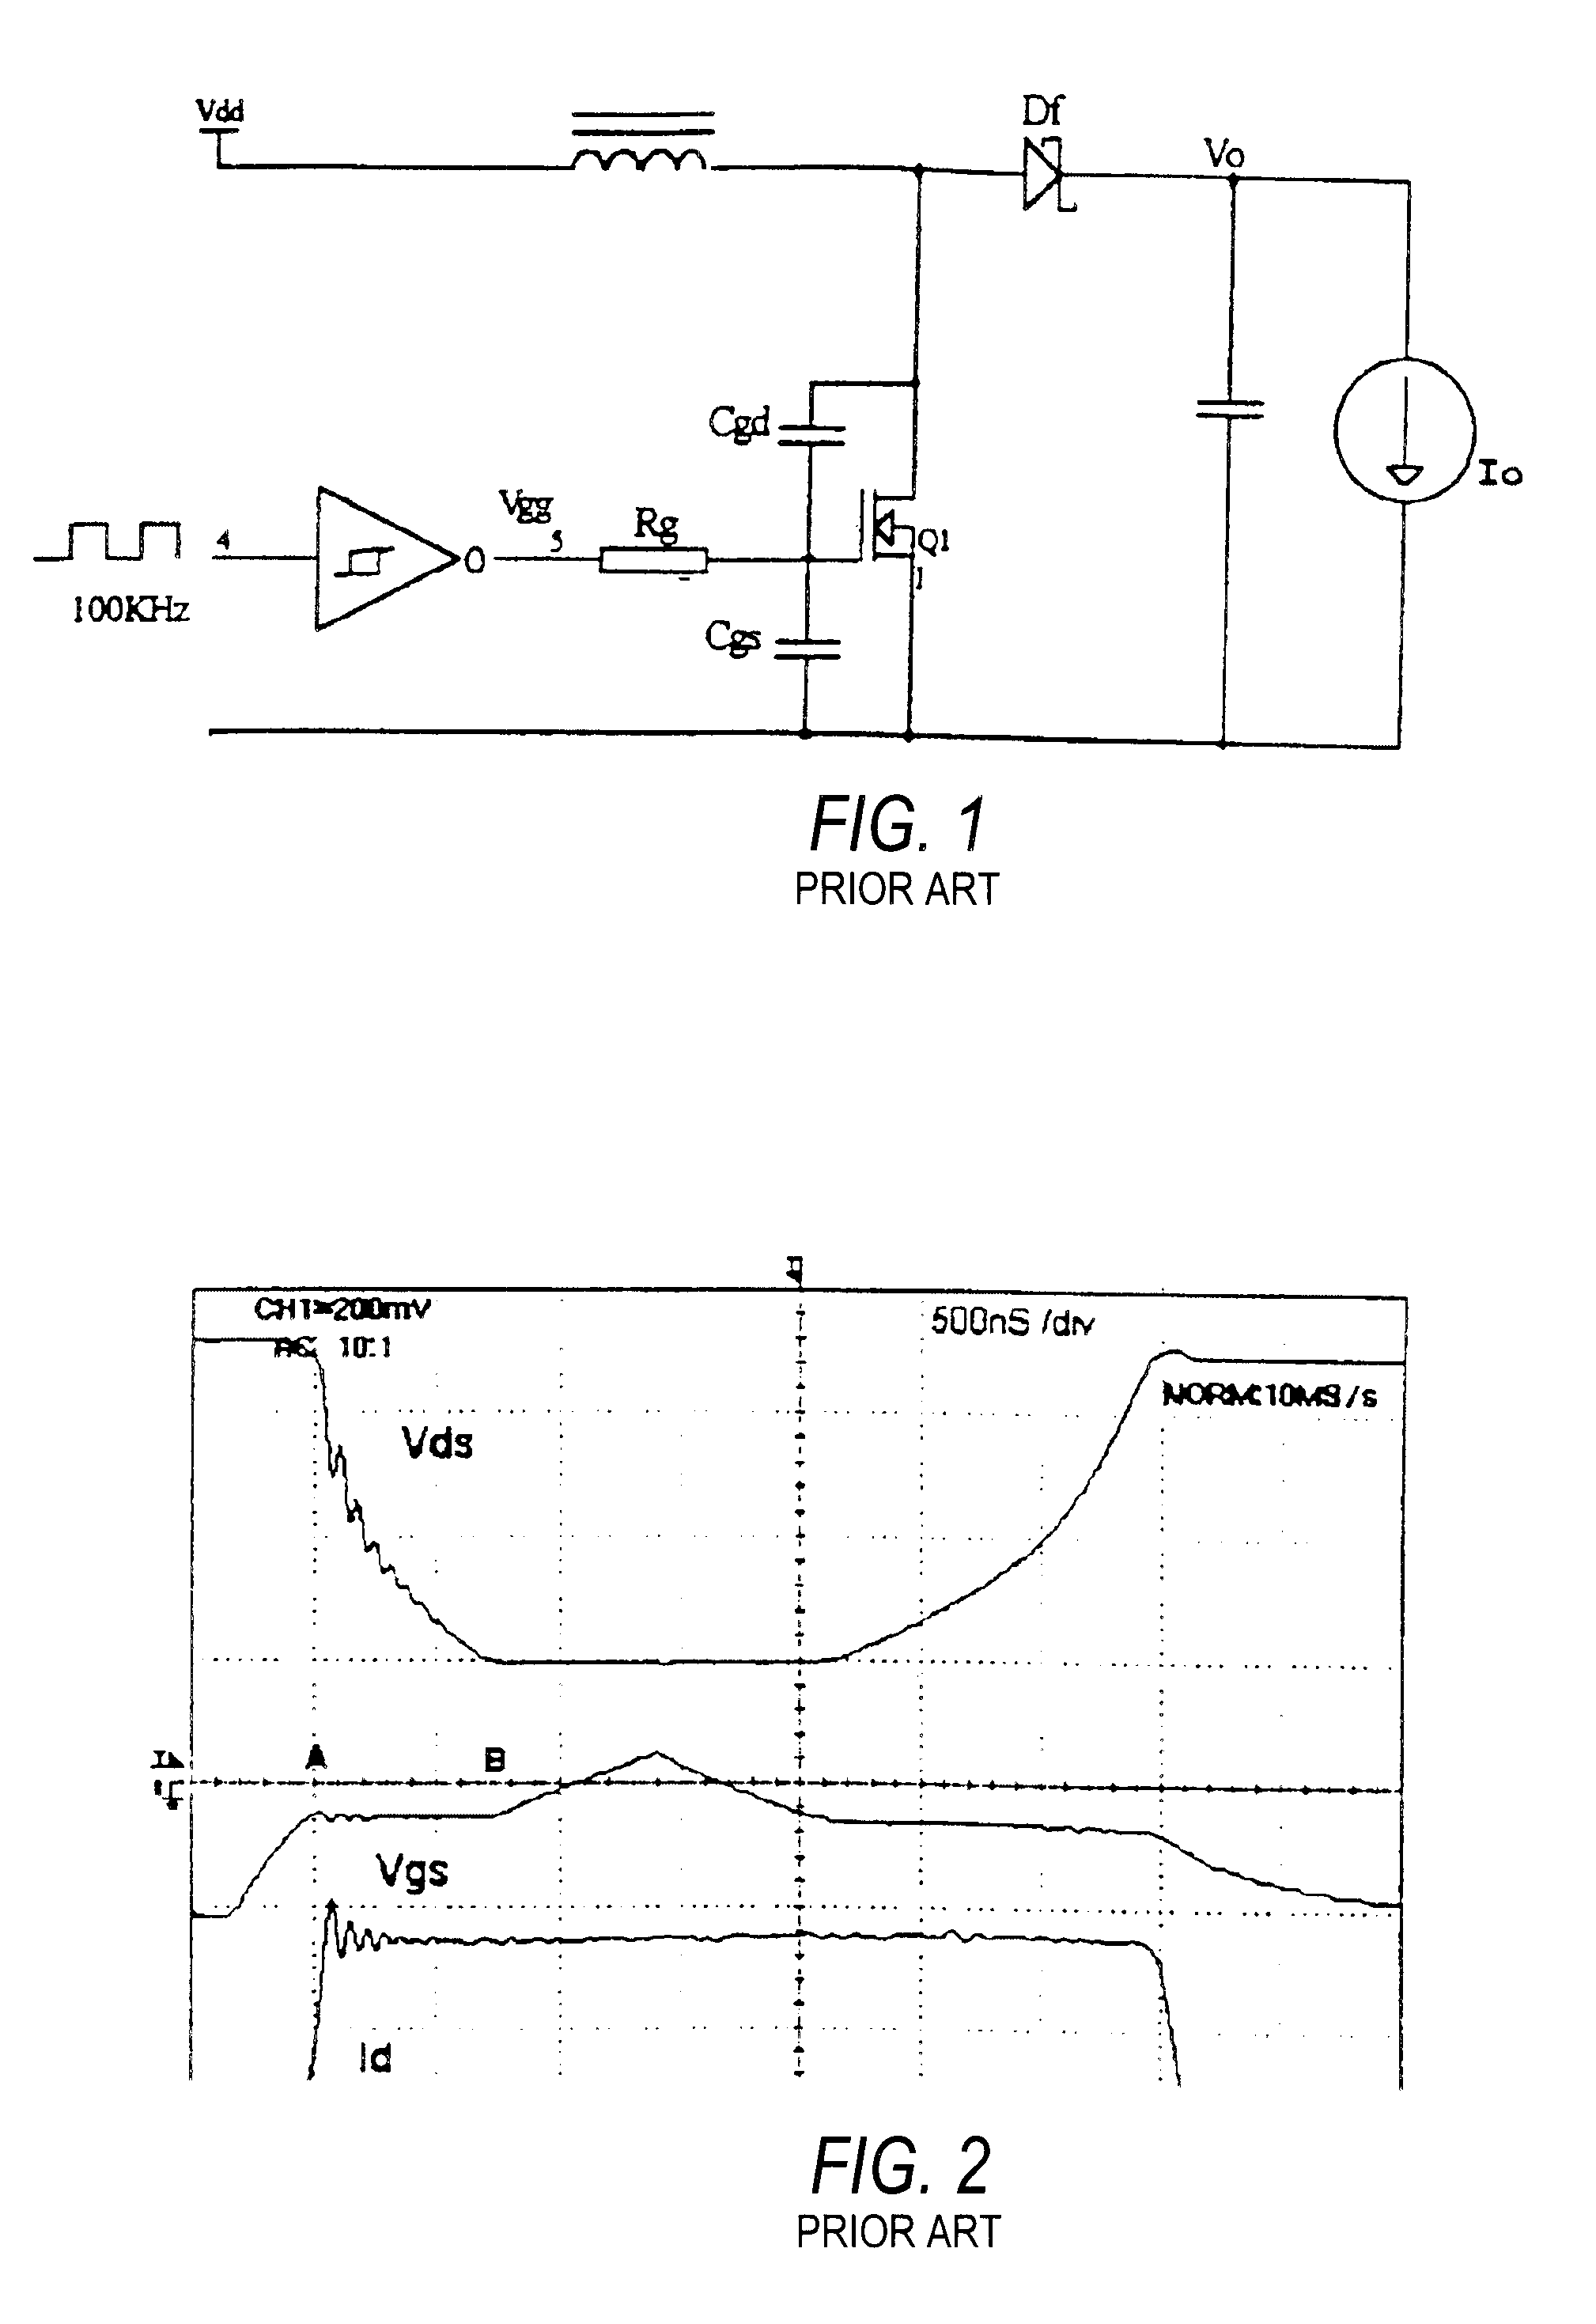 Gate drive for insulated gate power semiconductors